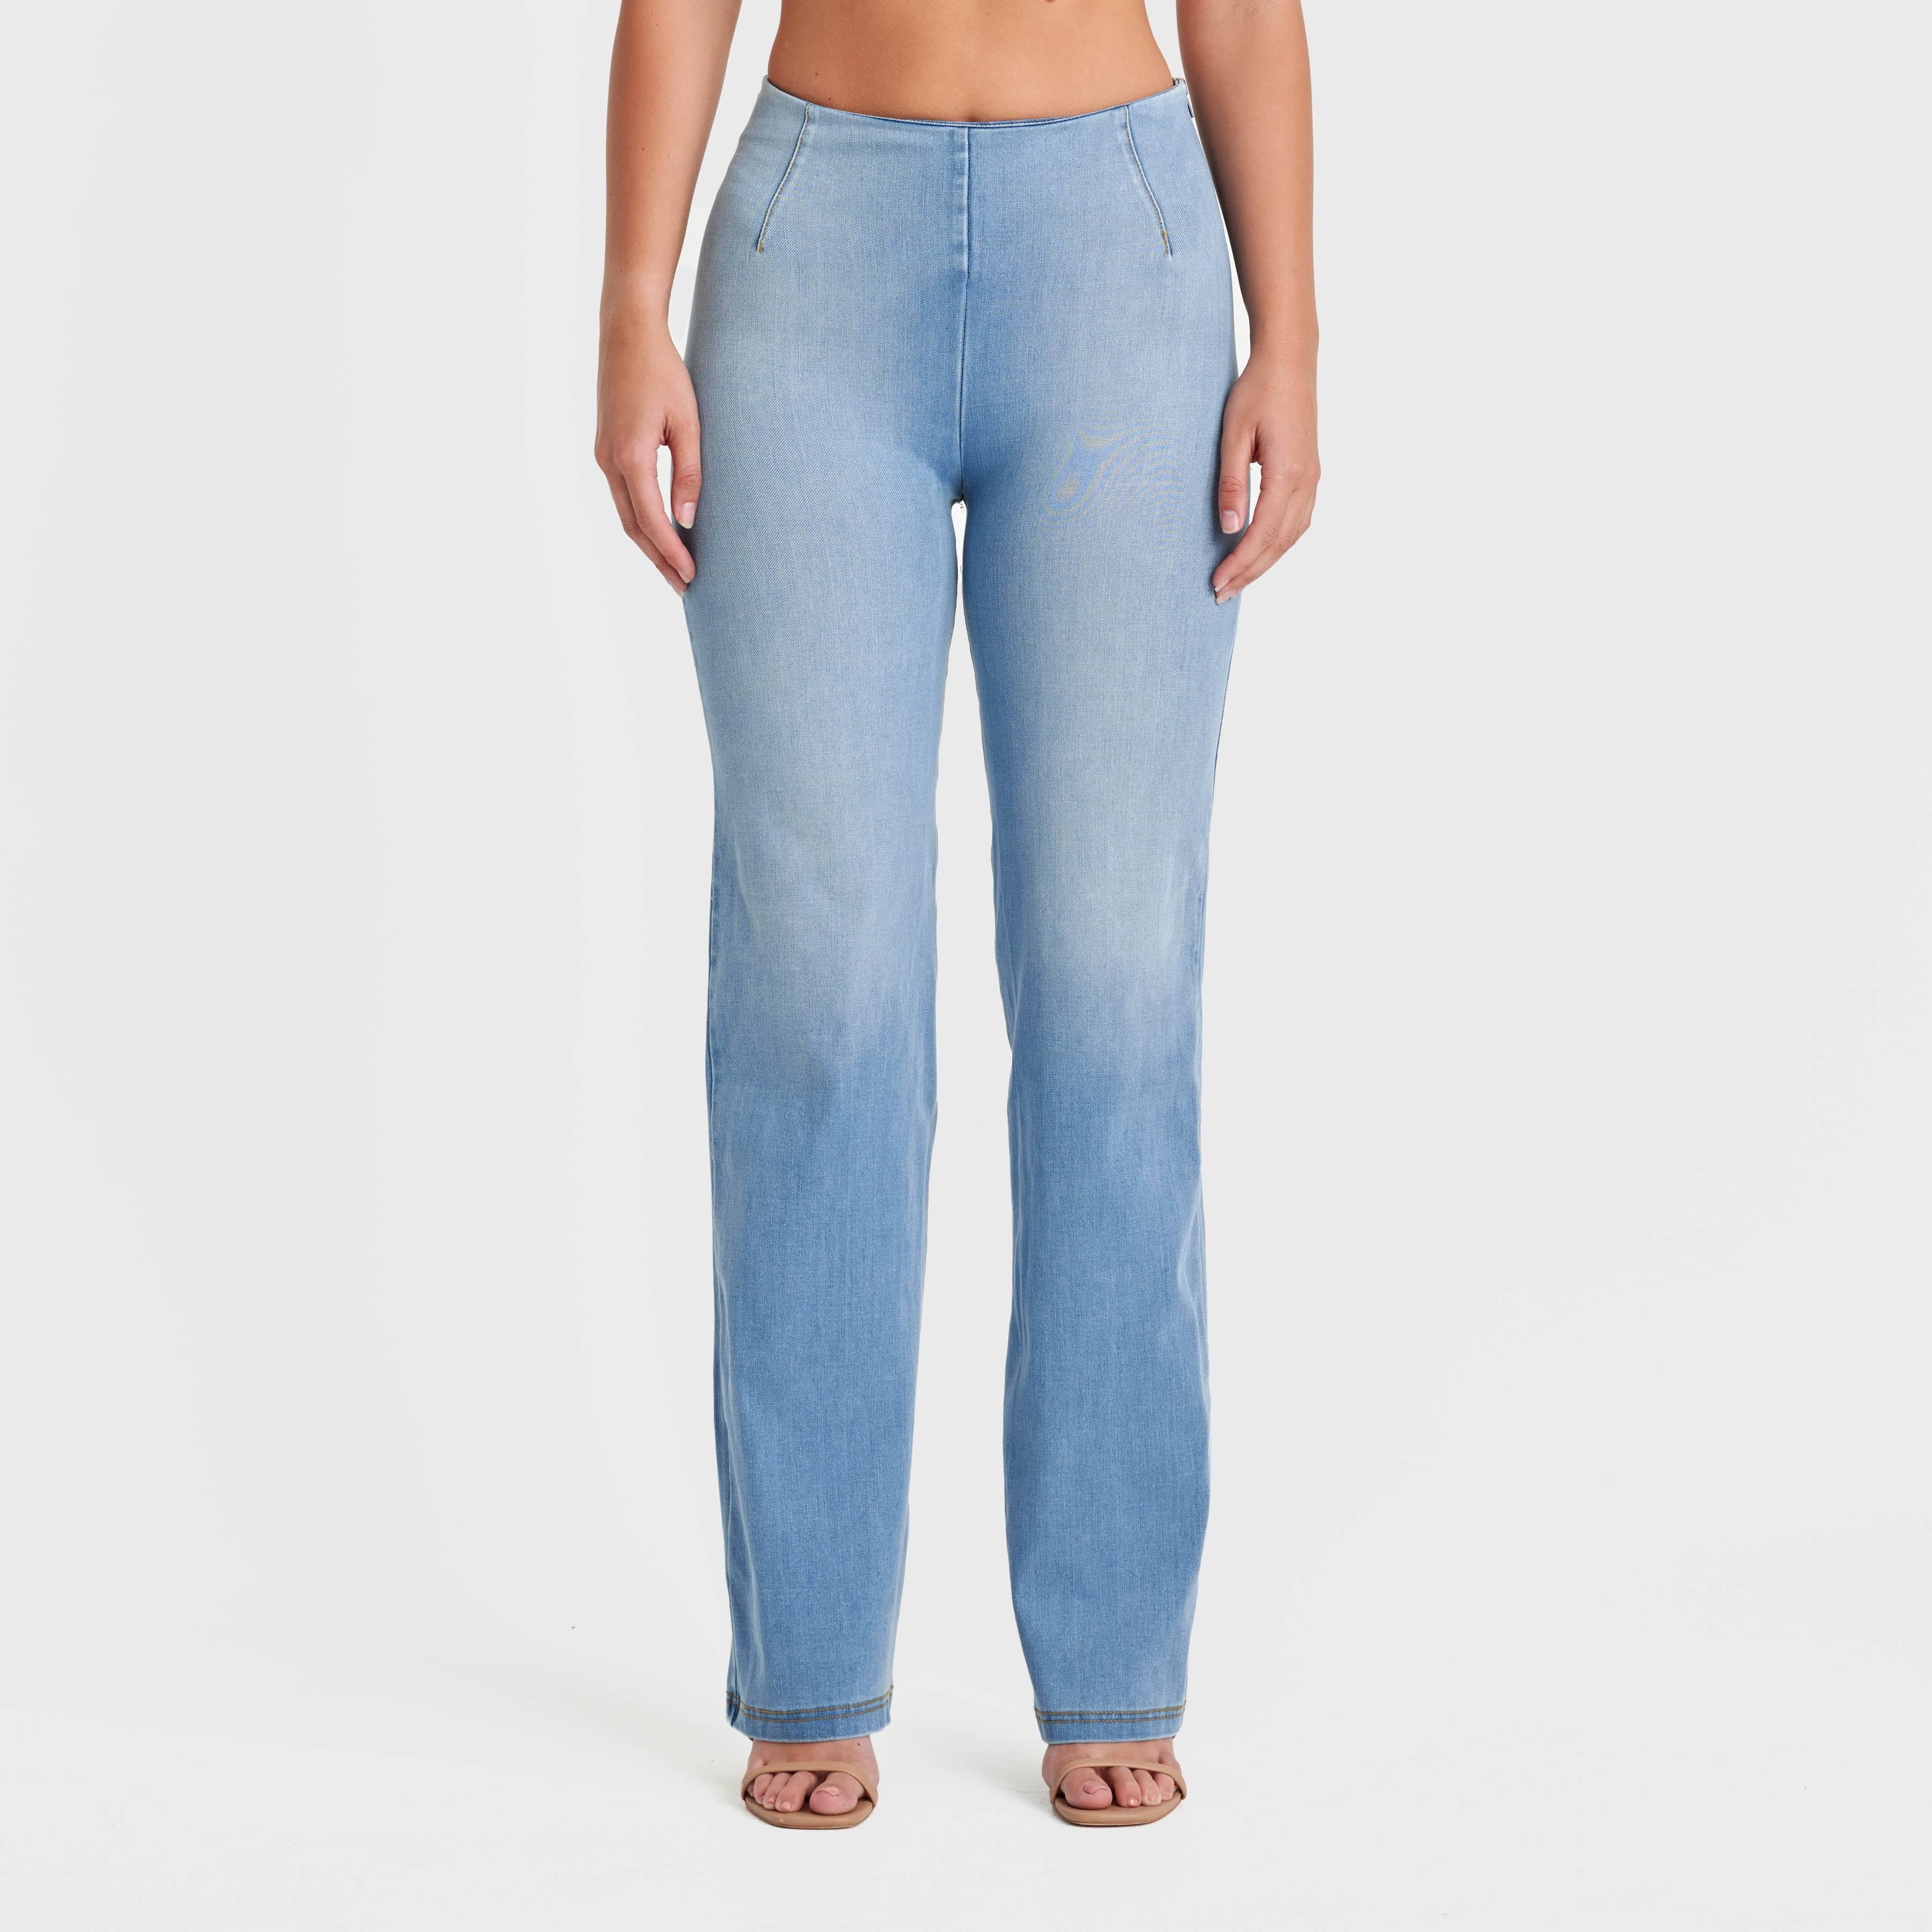 WR.UP® SNUG Jeans - High Waisted - Flare - Light Blue + Yellow Stitching 3